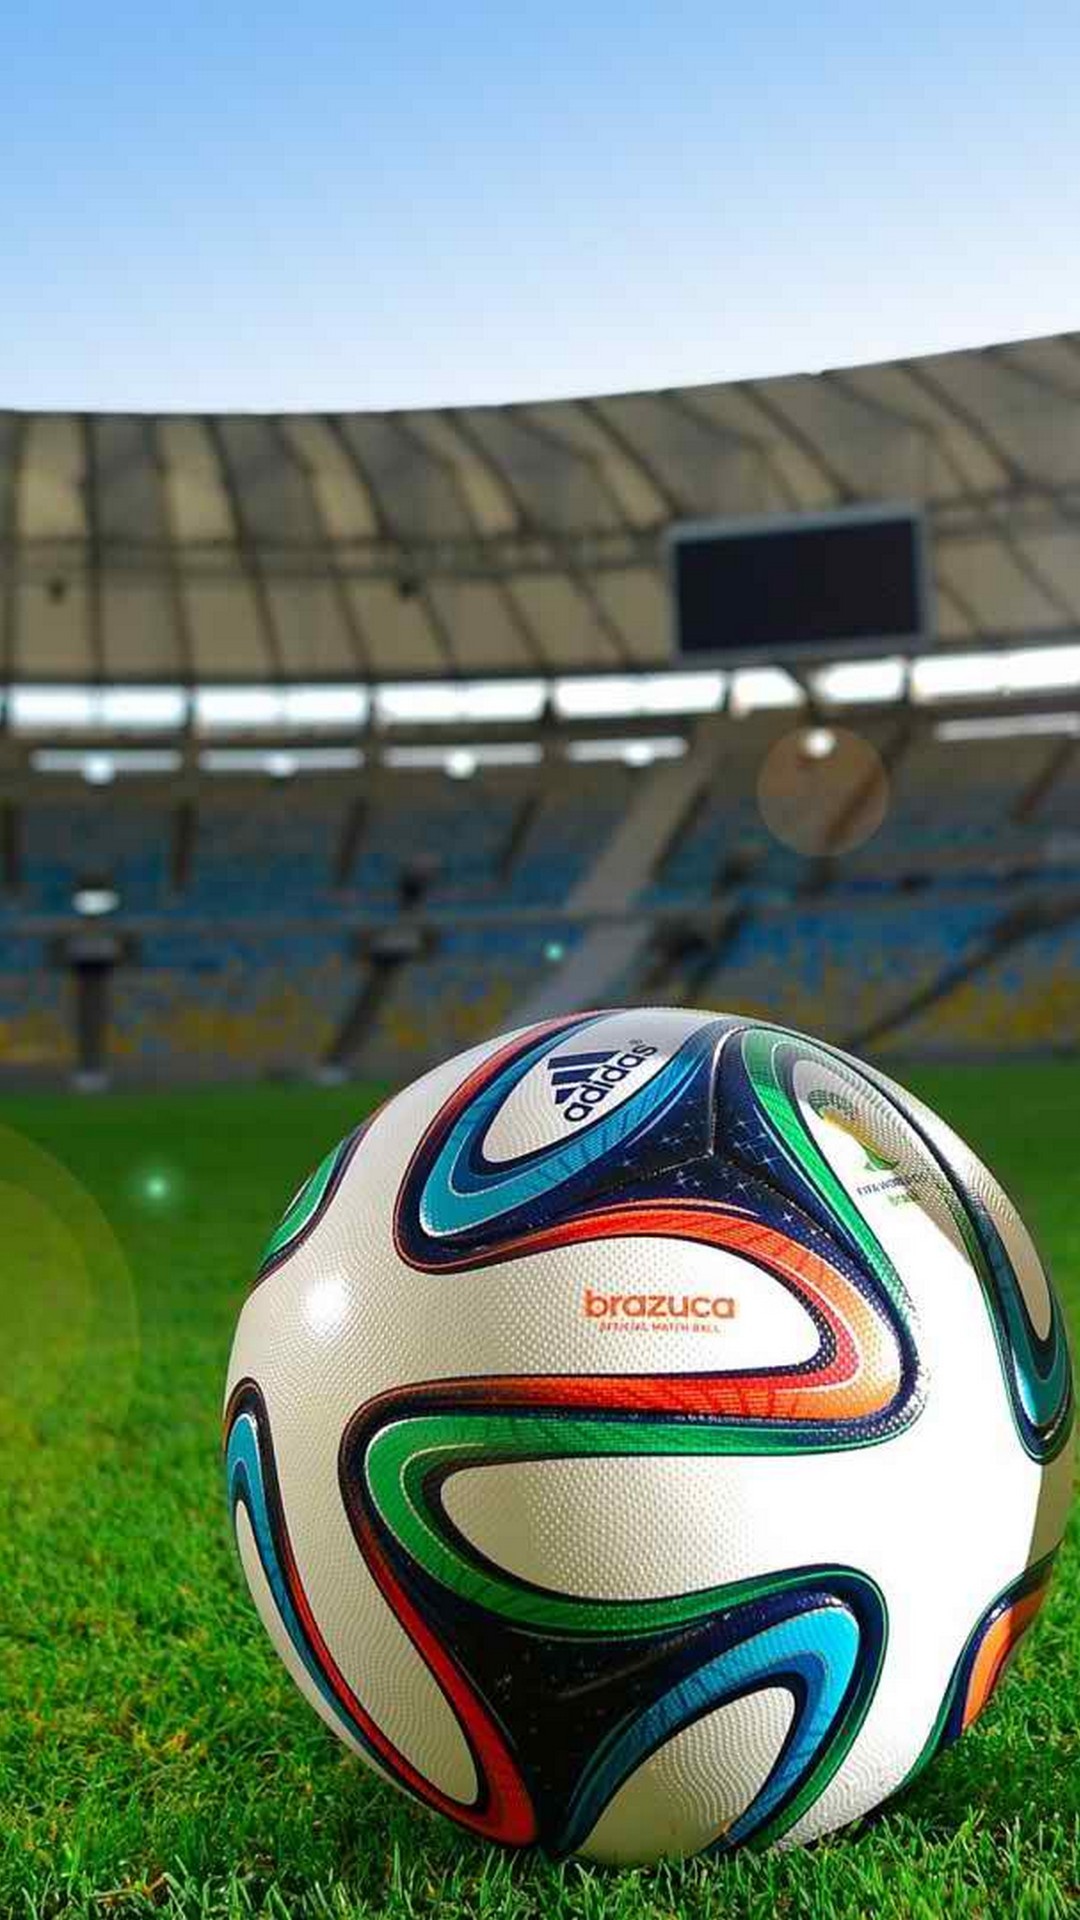 2018 World Cup Wallpaper For iPhone resolution 1080x1920